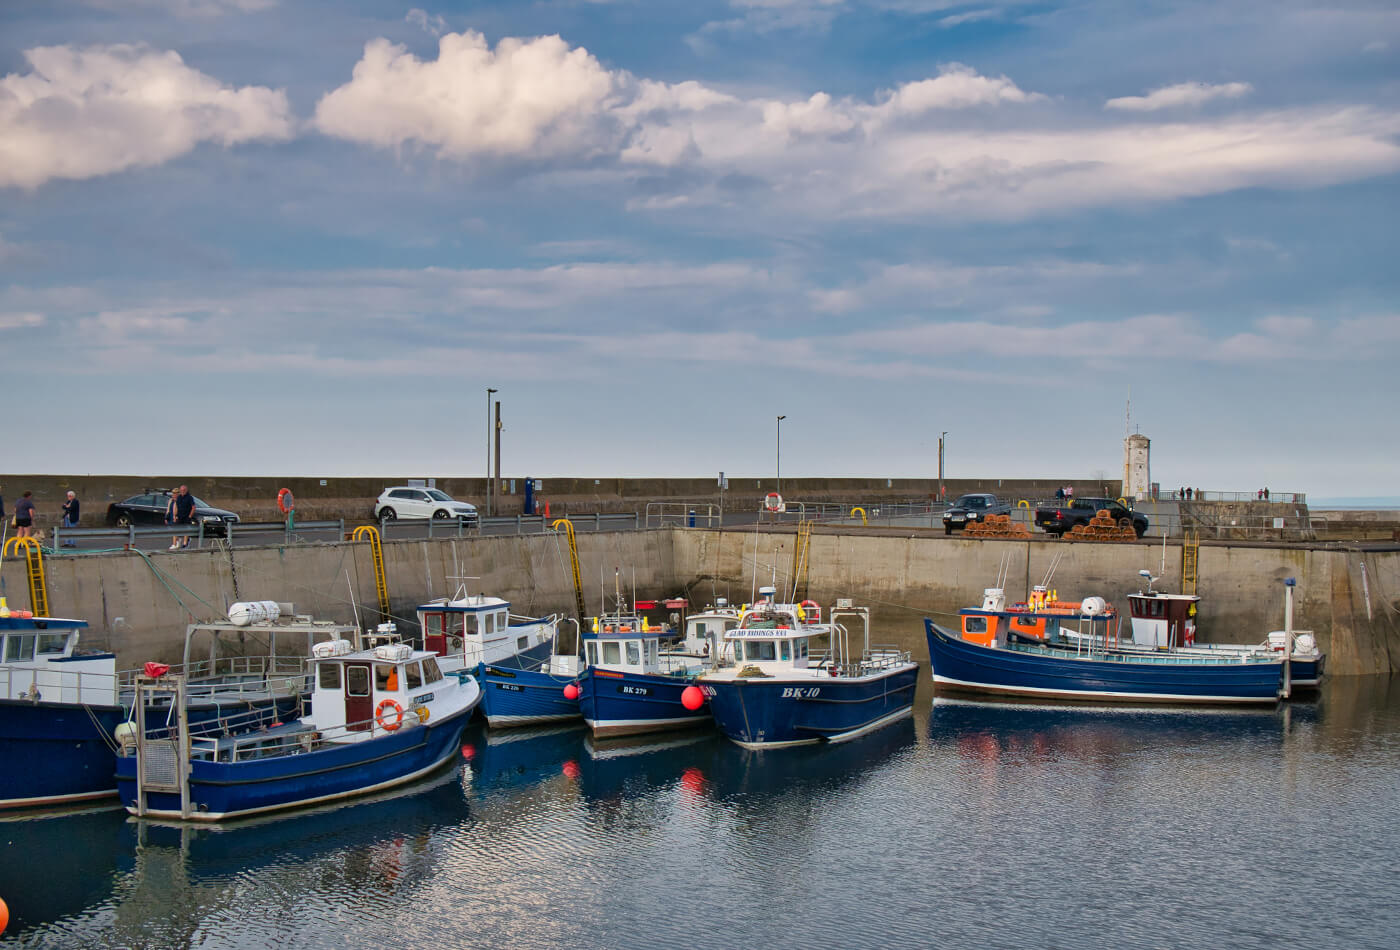 Boats docked at the harbour in Seahouses